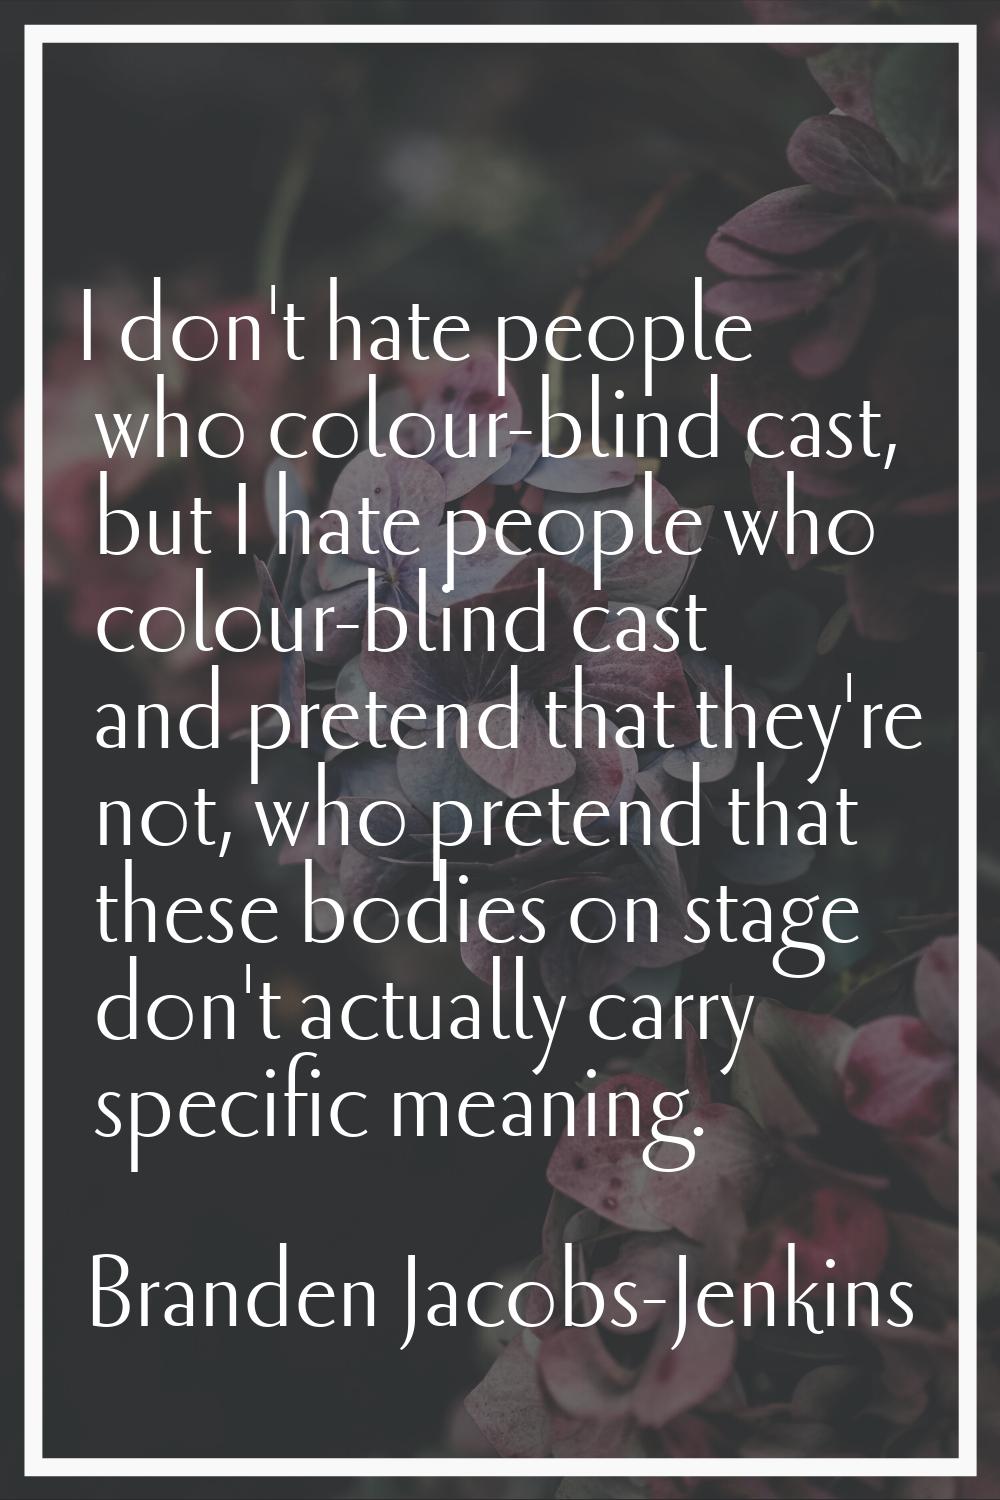 I don't hate people who colour-blind cast, but I hate people who colour-blind cast and pretend that